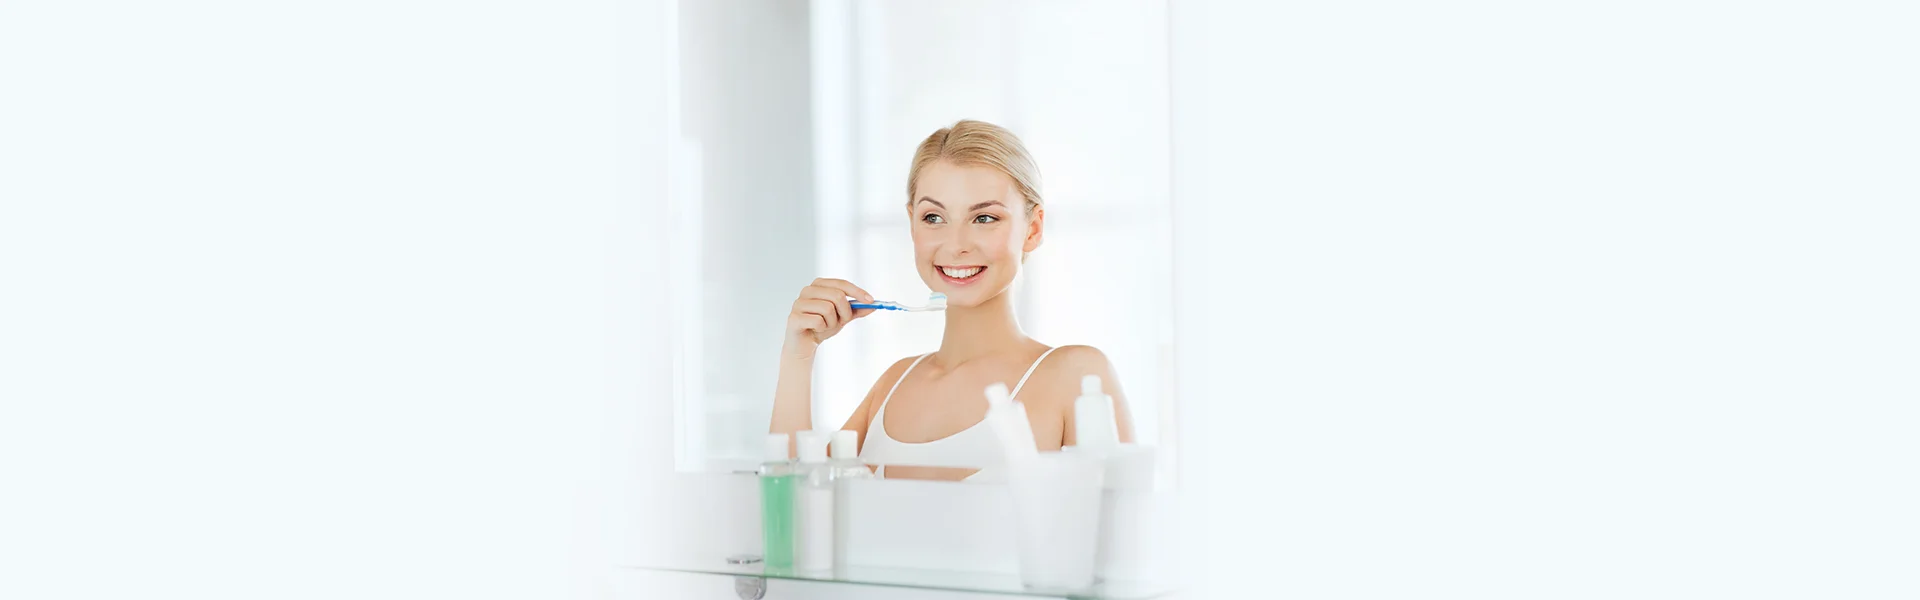 When Can I Start Brushing With Toothpaste After Tooth Extraction?